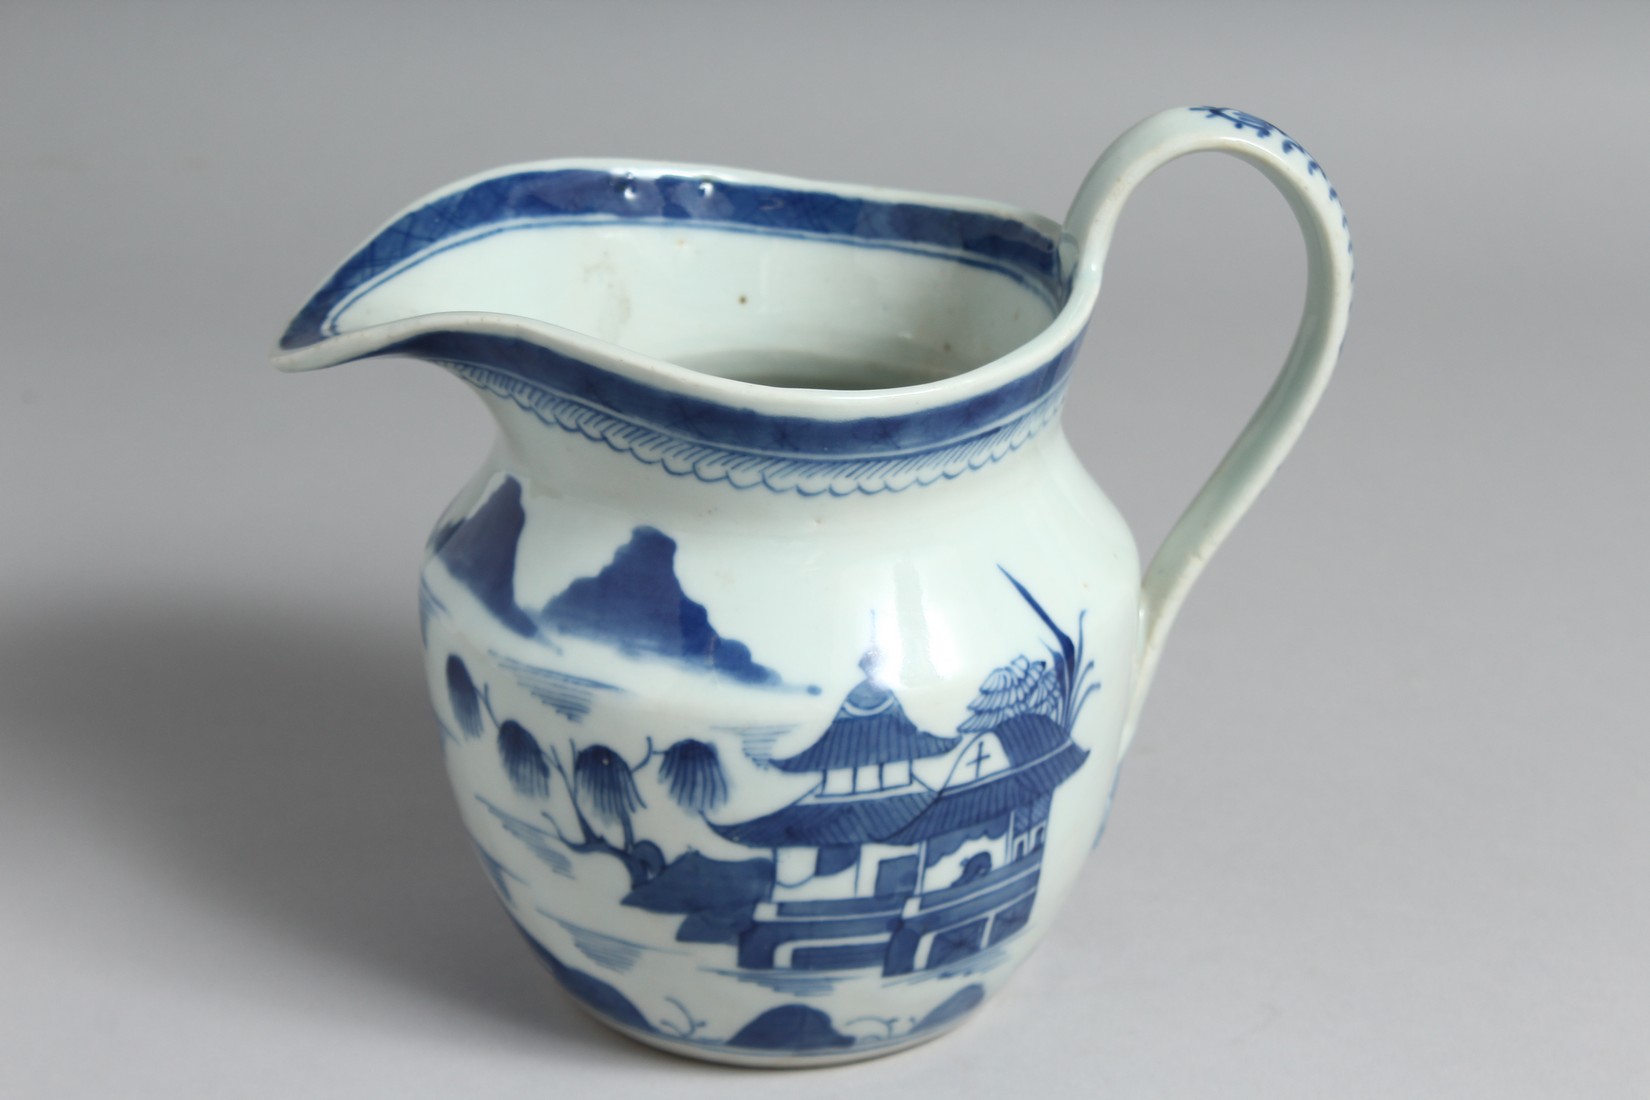 A CHINESE BLUE AND WHITE PORCELAIN JUG decorated with a landscape scene with boats and buildings. - Image 3 of 5